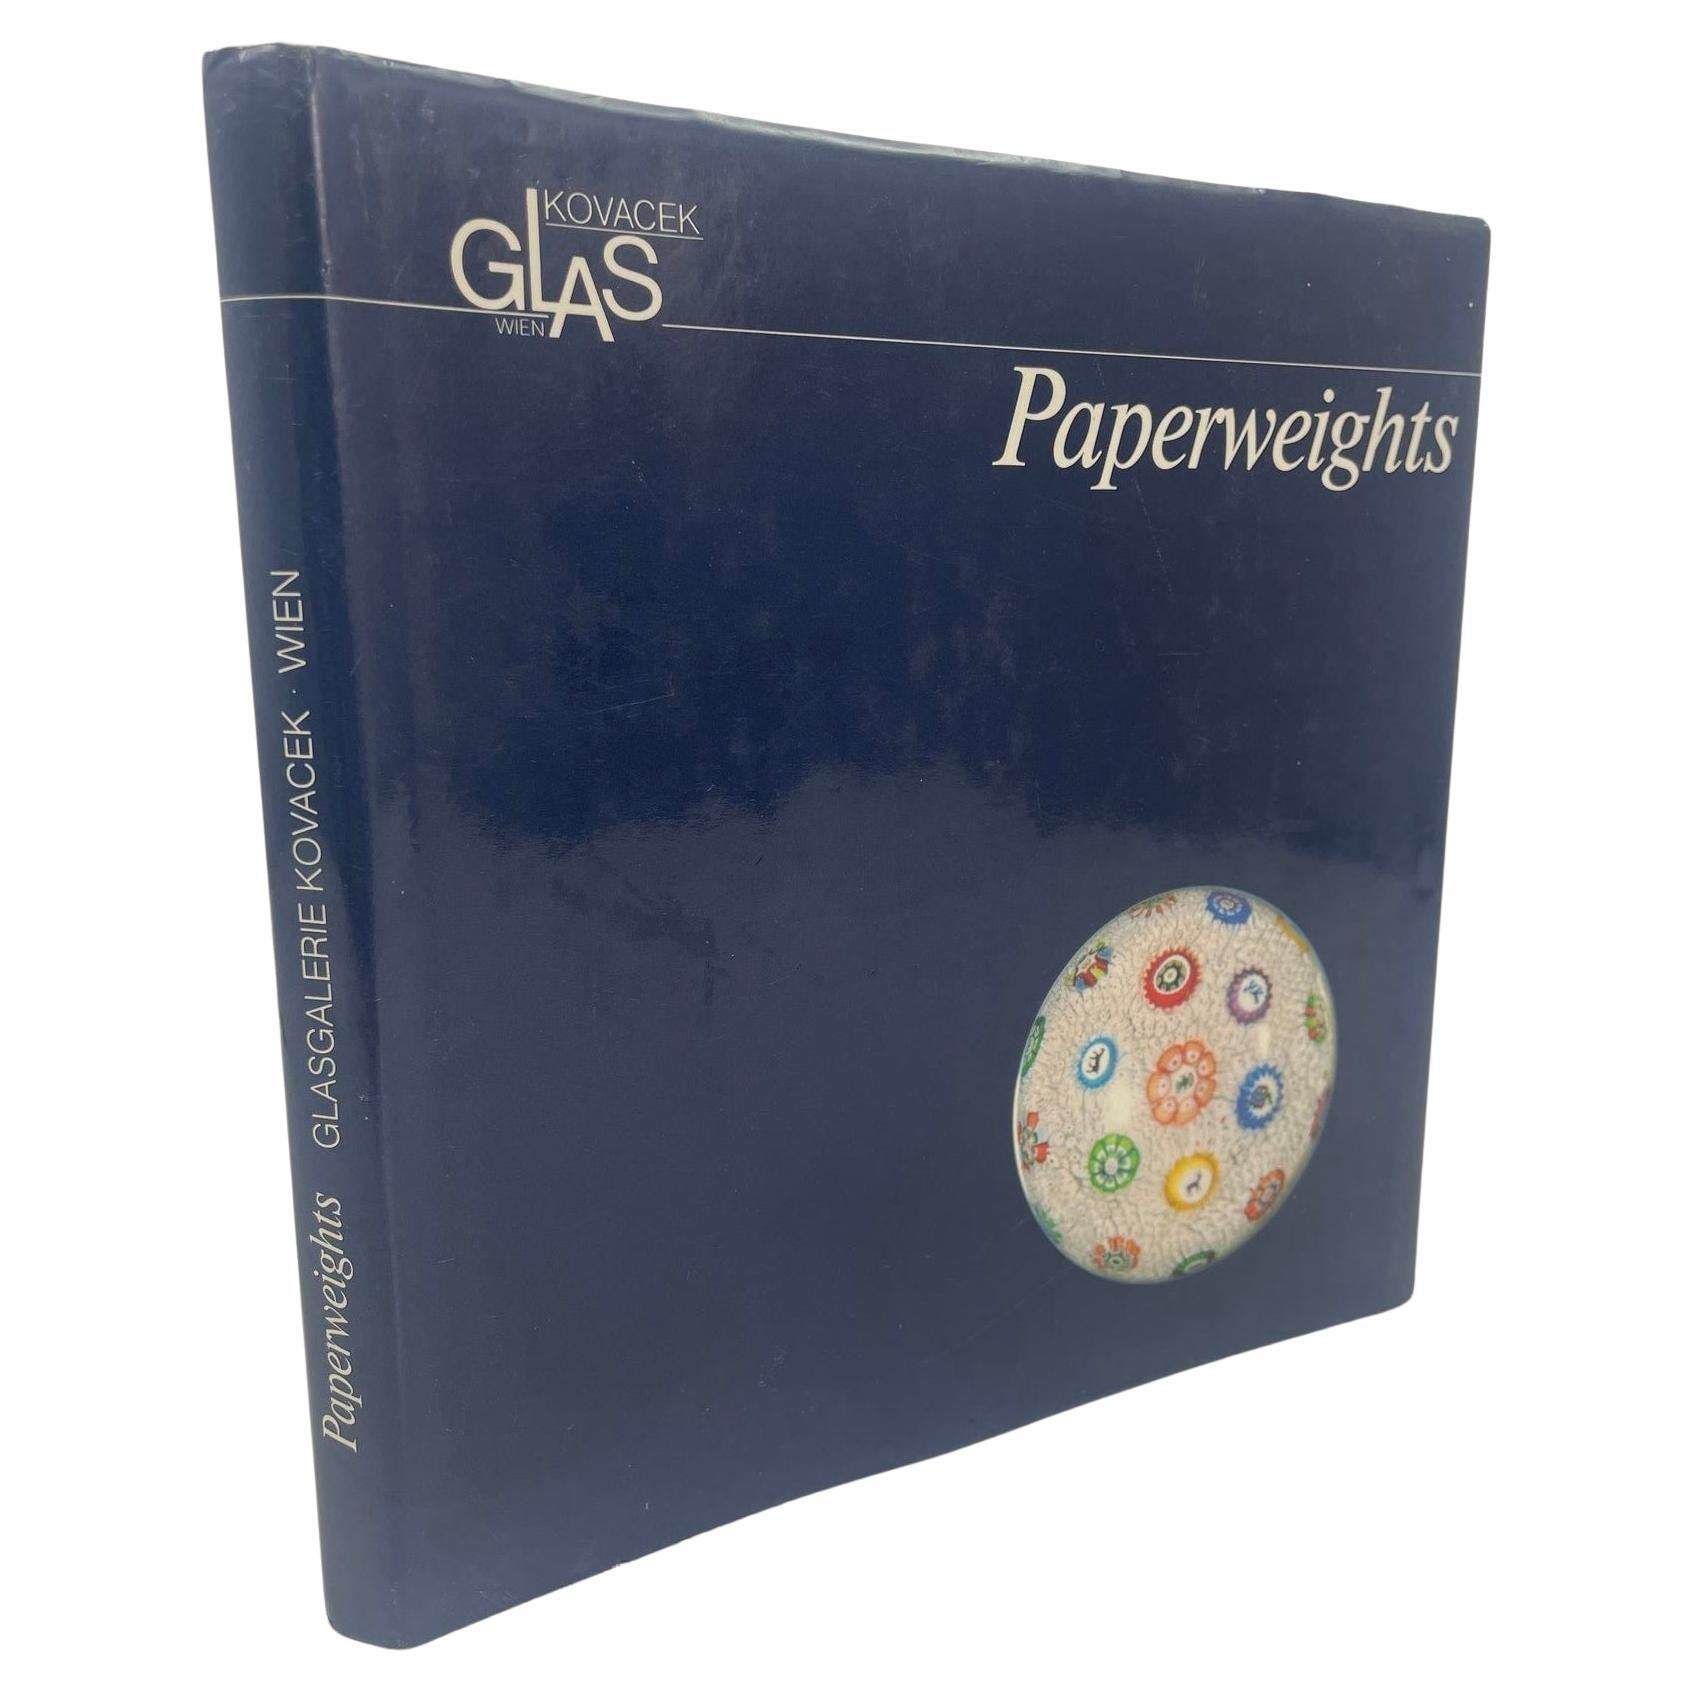 Paperweights Glass Gallery Michael Kovacek Vienna 1987 Hardcover Reference Book For Sale